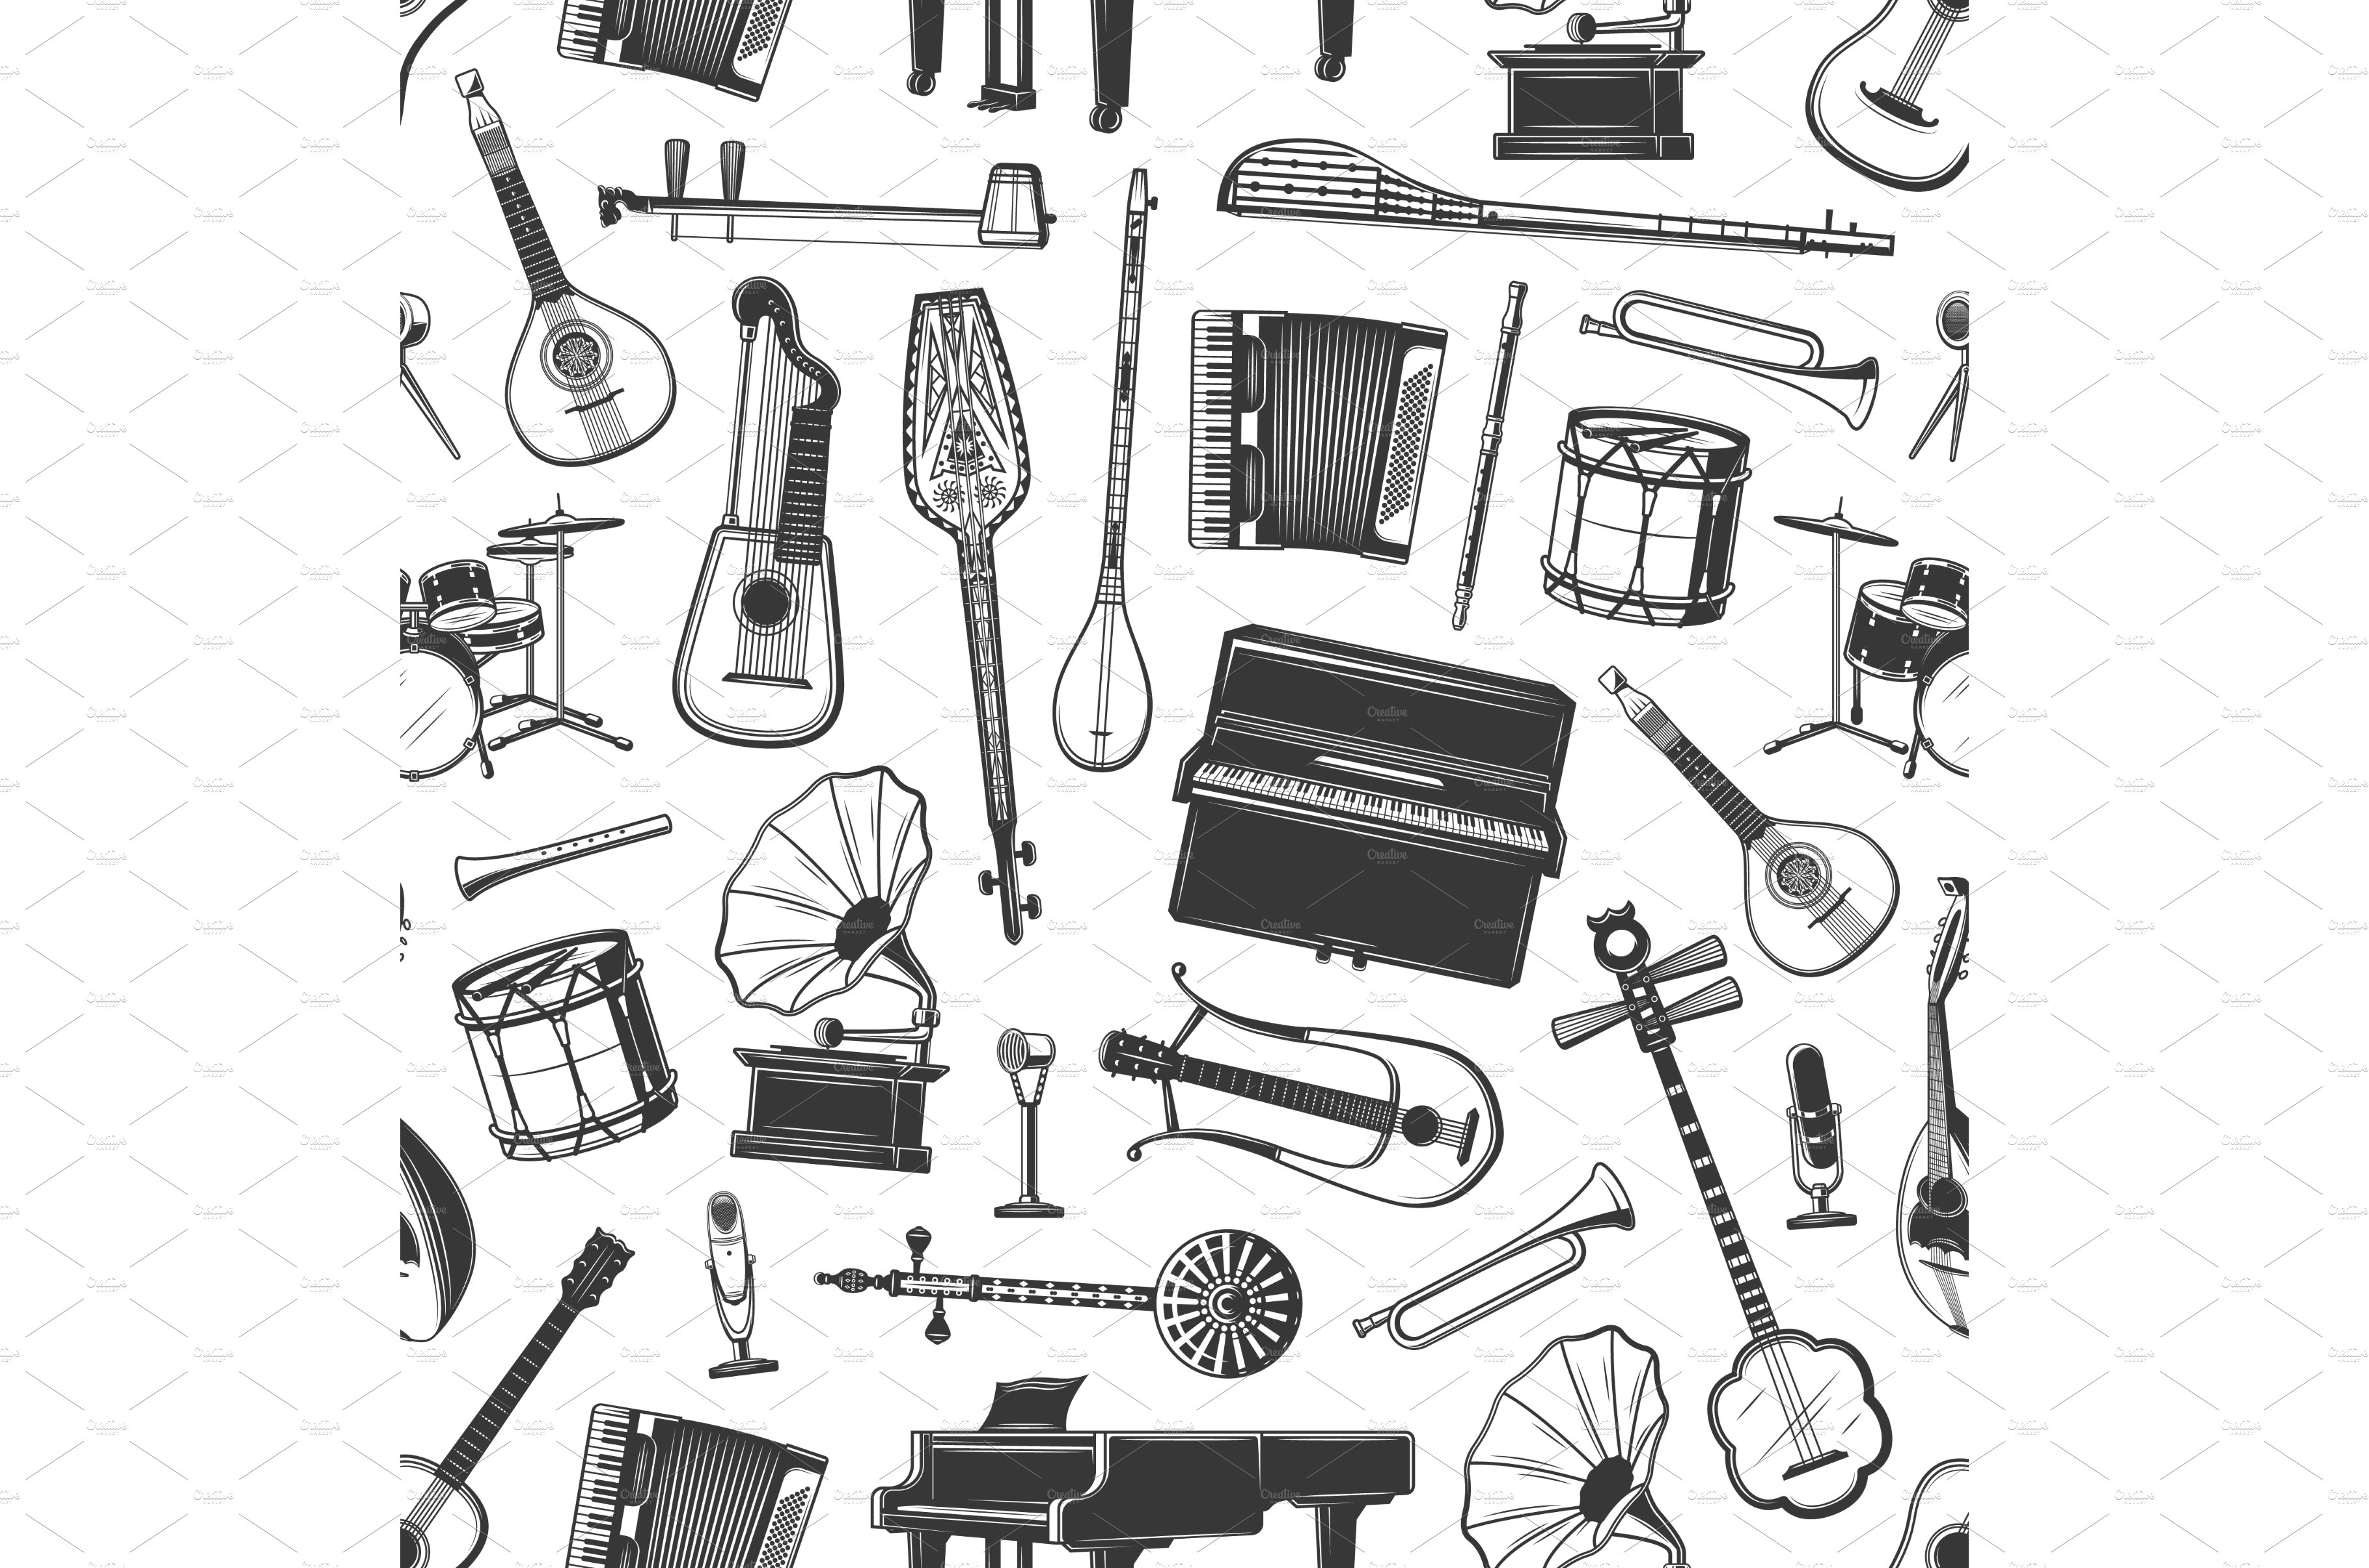 36,048 Musical Instrument Sketch Images, Stock Photos, 3D objects, &  Vectors | Shutterstock